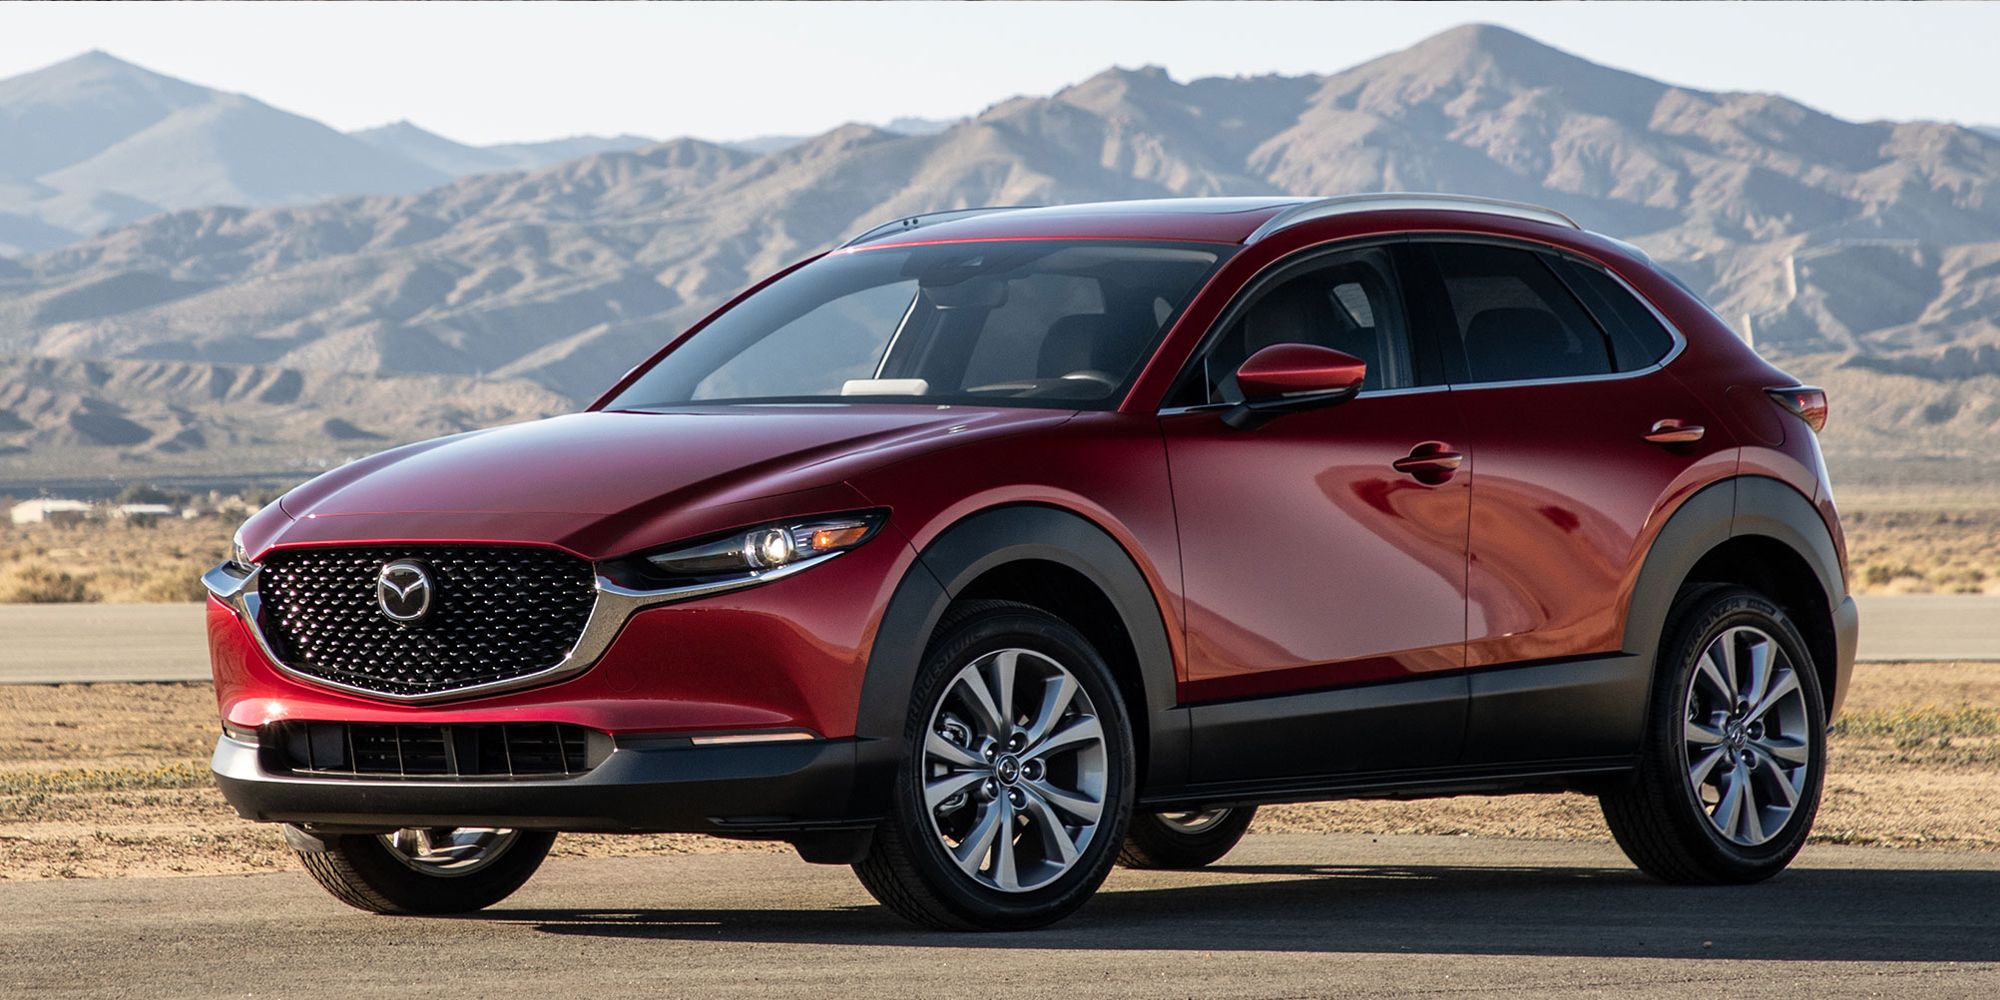 The front of the CX-30